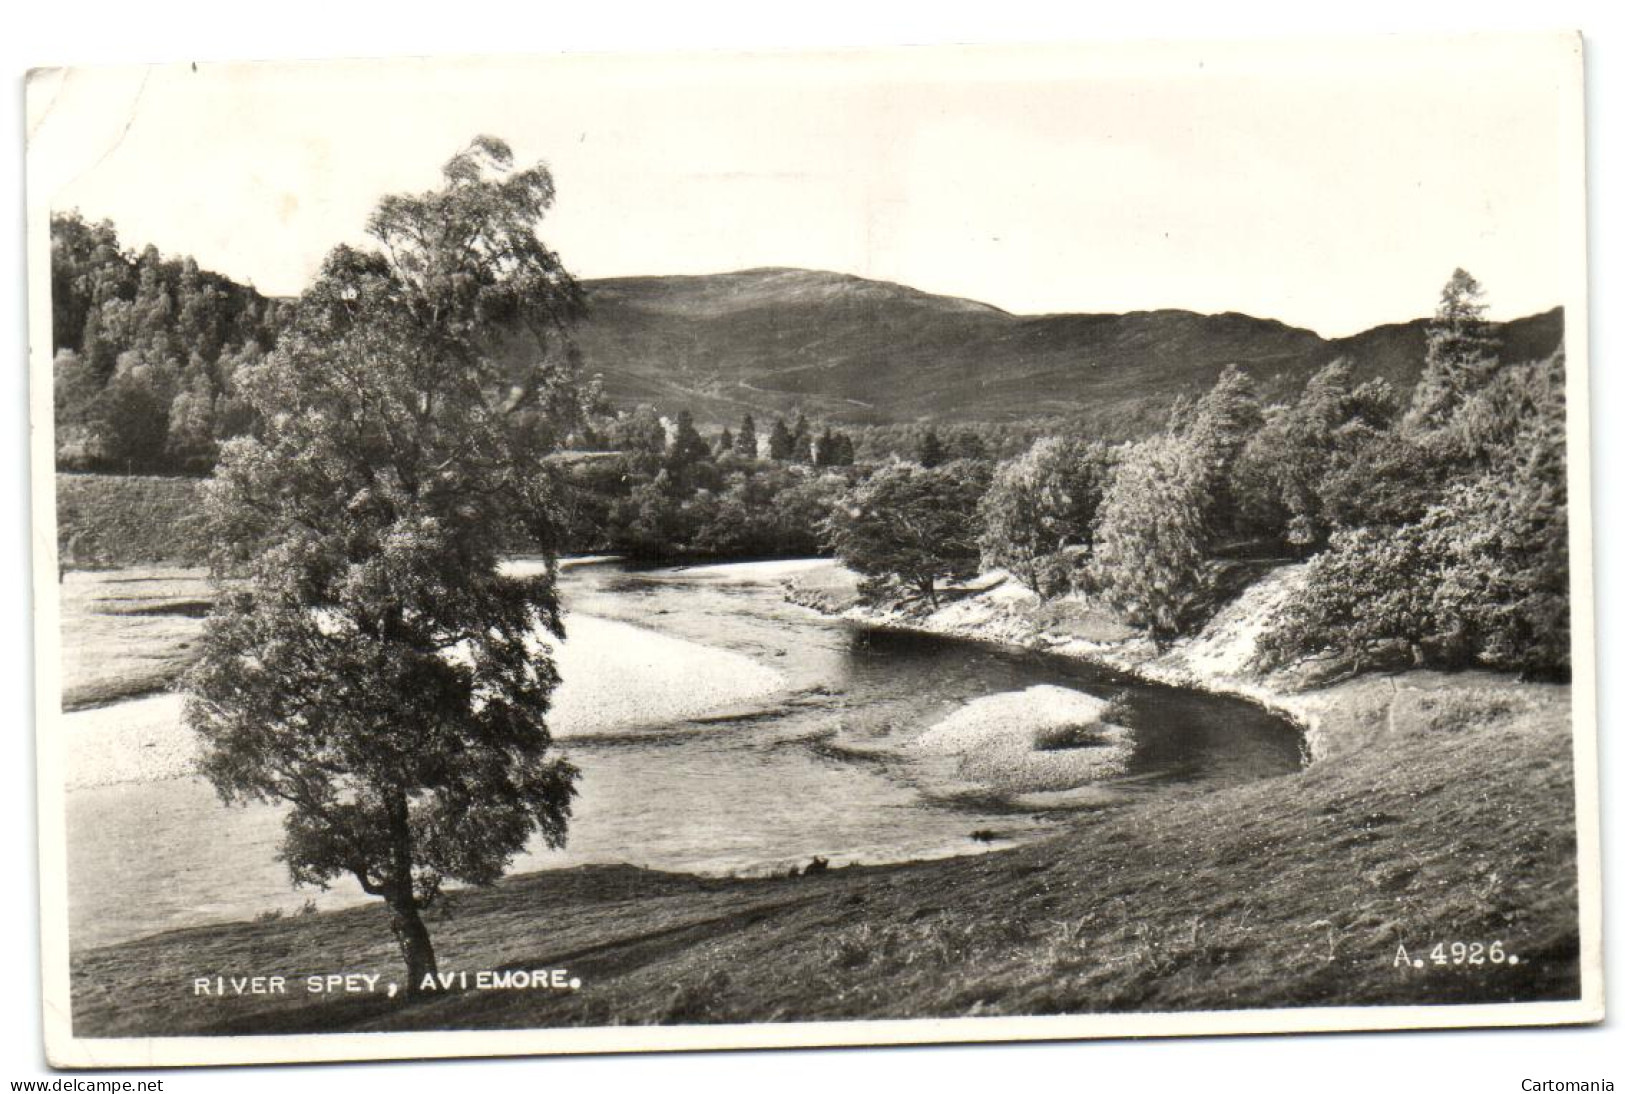 River Spey - Aviemore - Inverness-shire